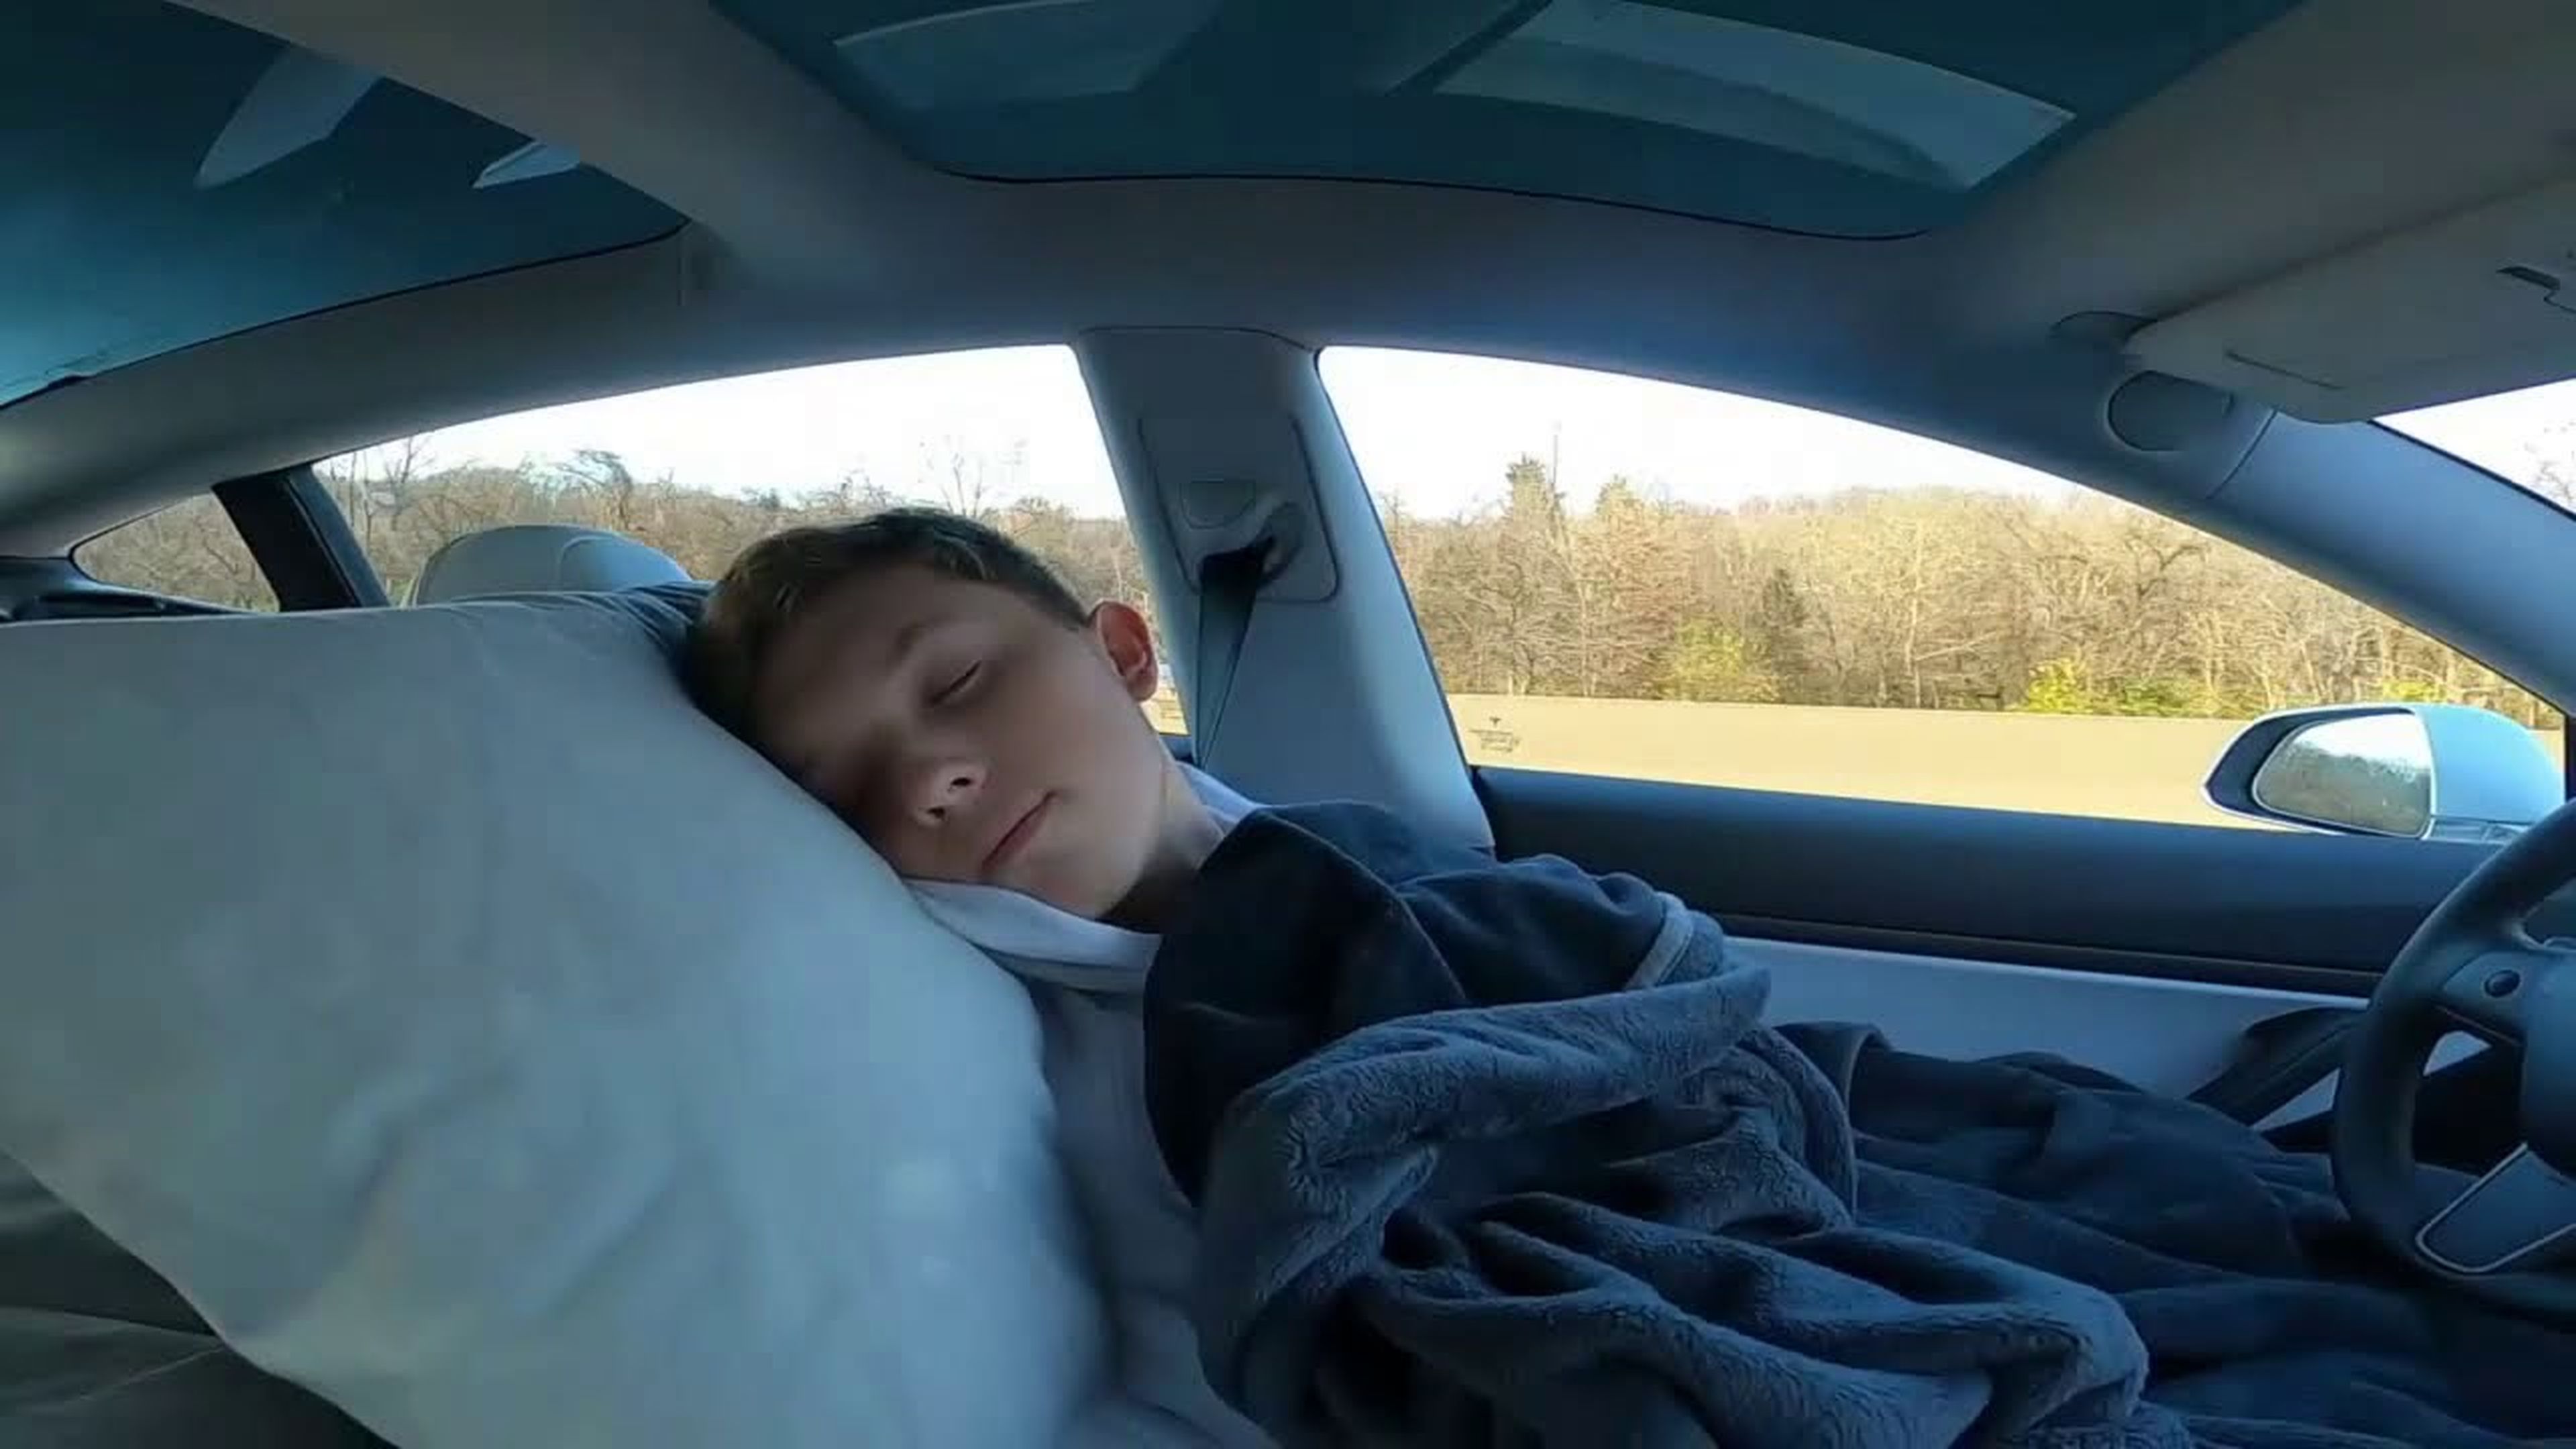 Sleeping in my Tesla while driving